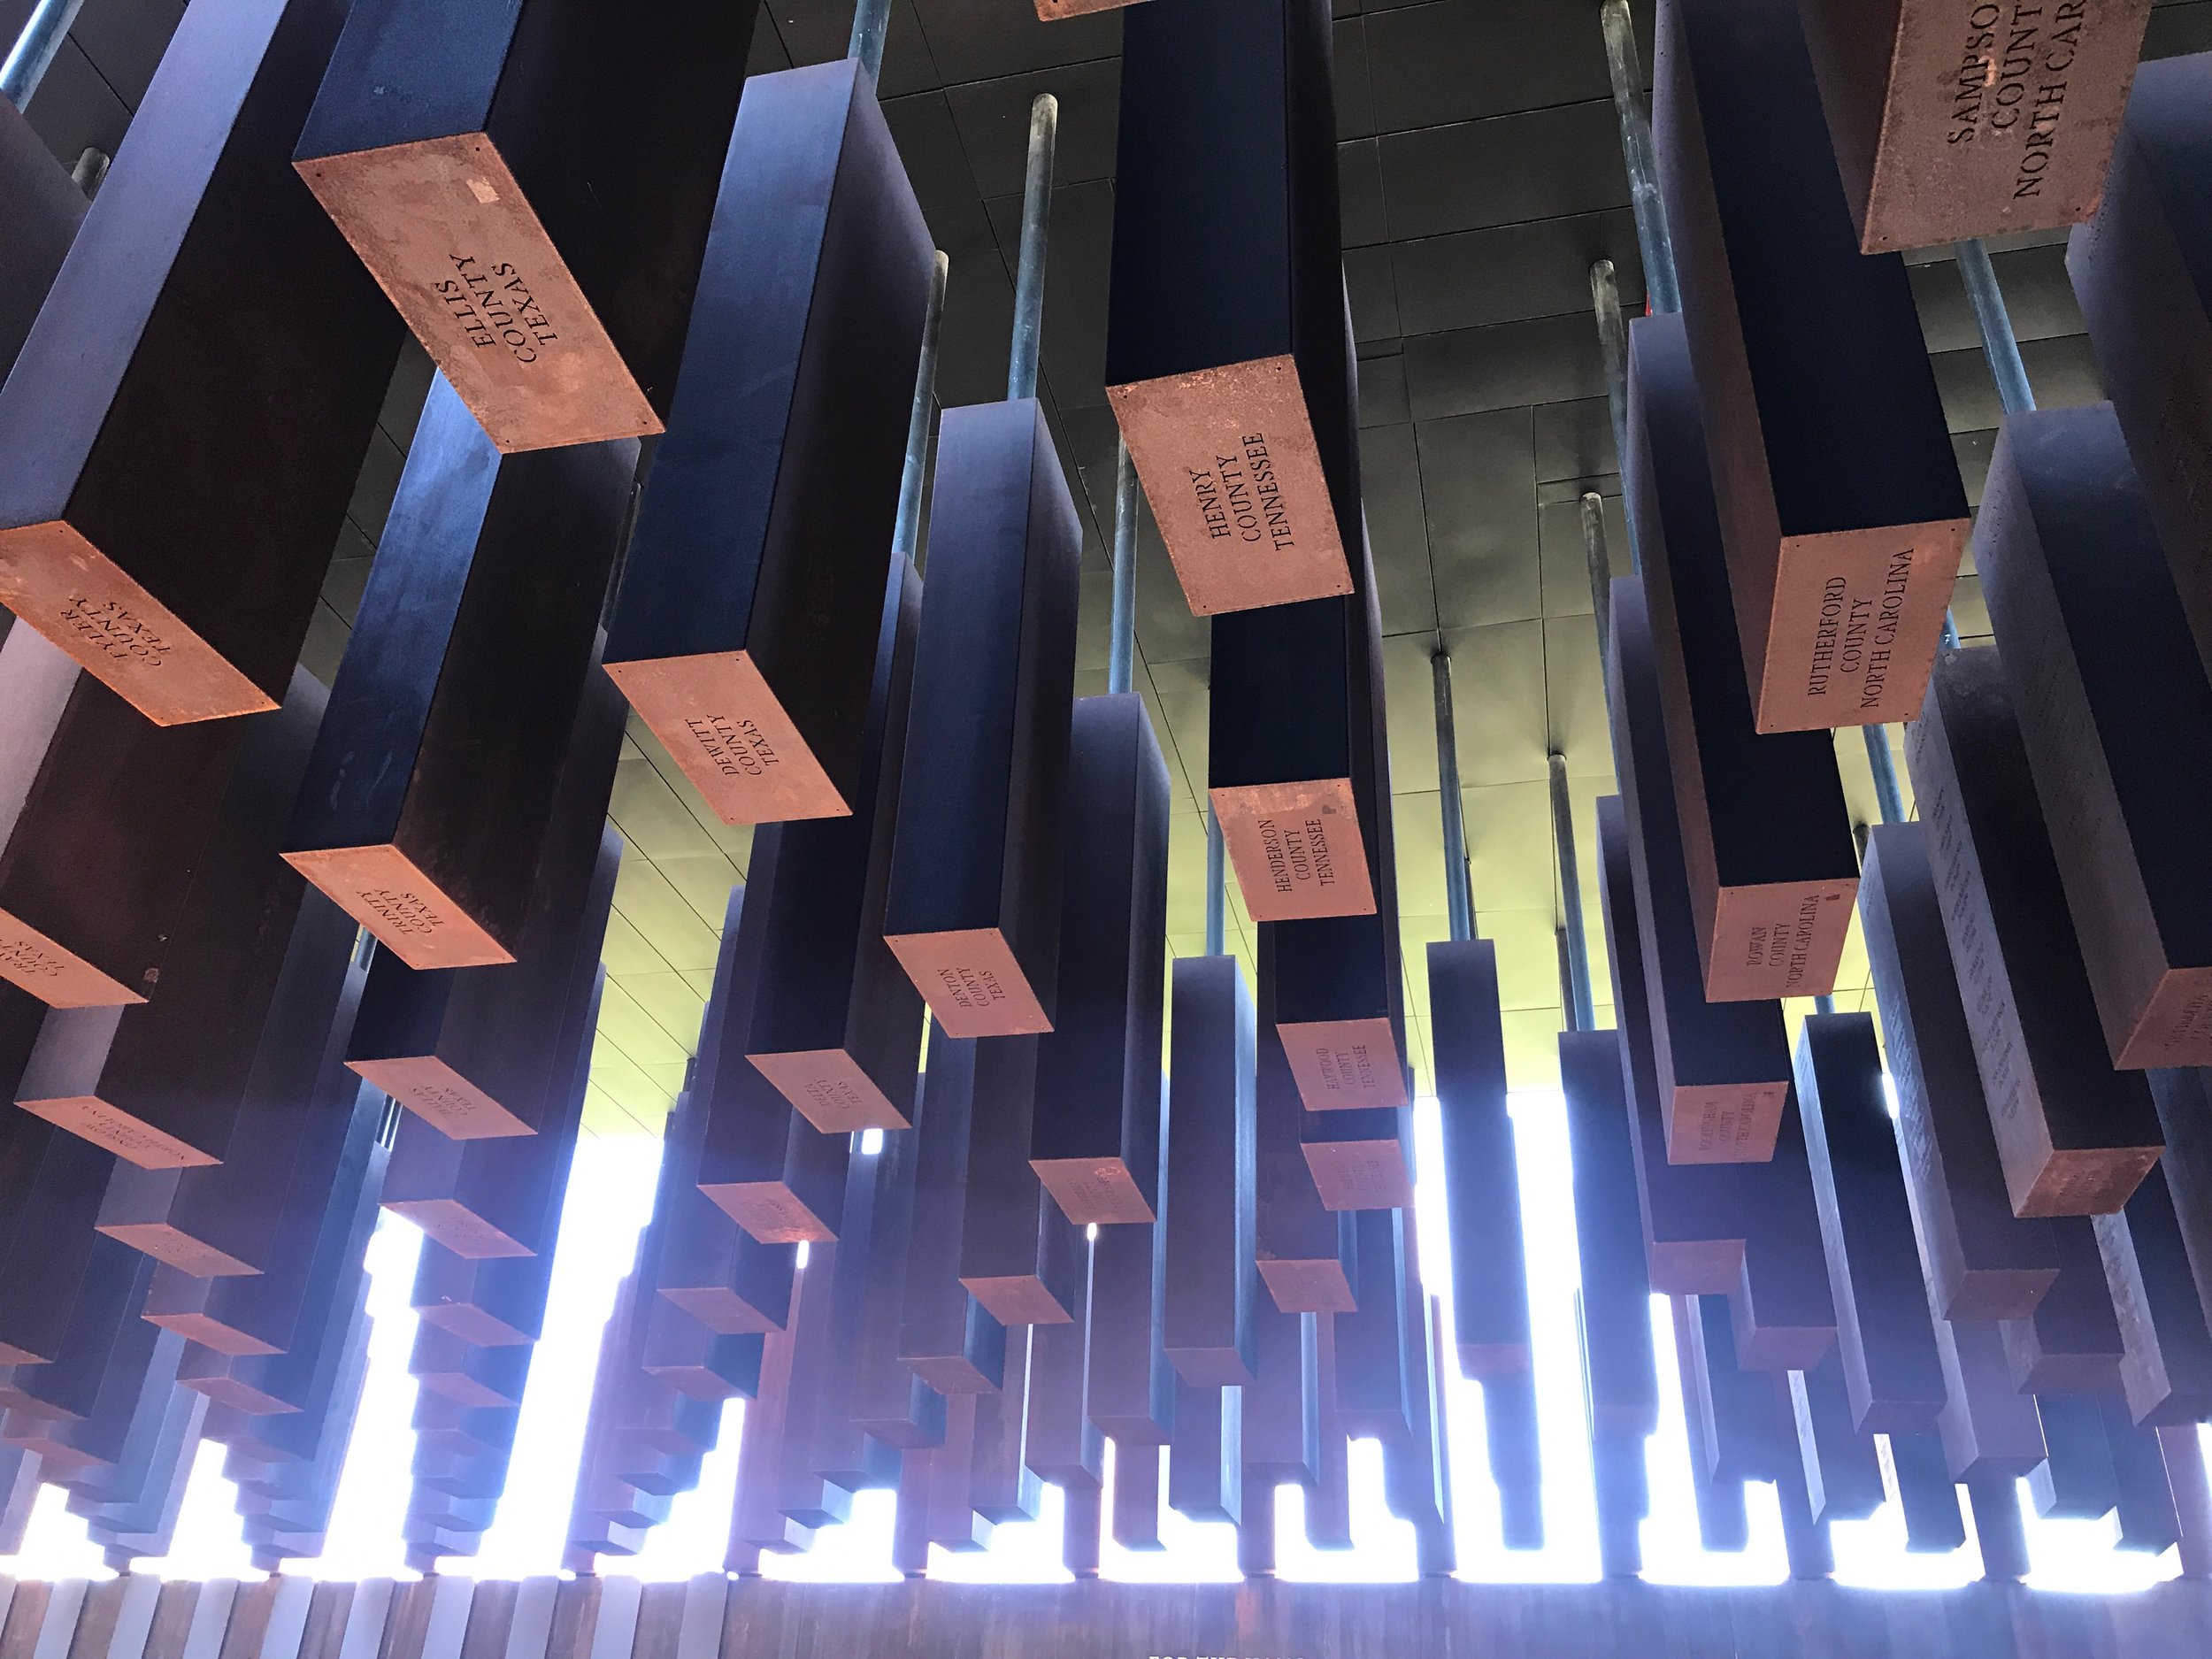  Steel slabs bearing the names of lynching victims killed between the Civil War and 1949 hang at the National Memorial for Peace and Justice in Montgomery, Alabama.      